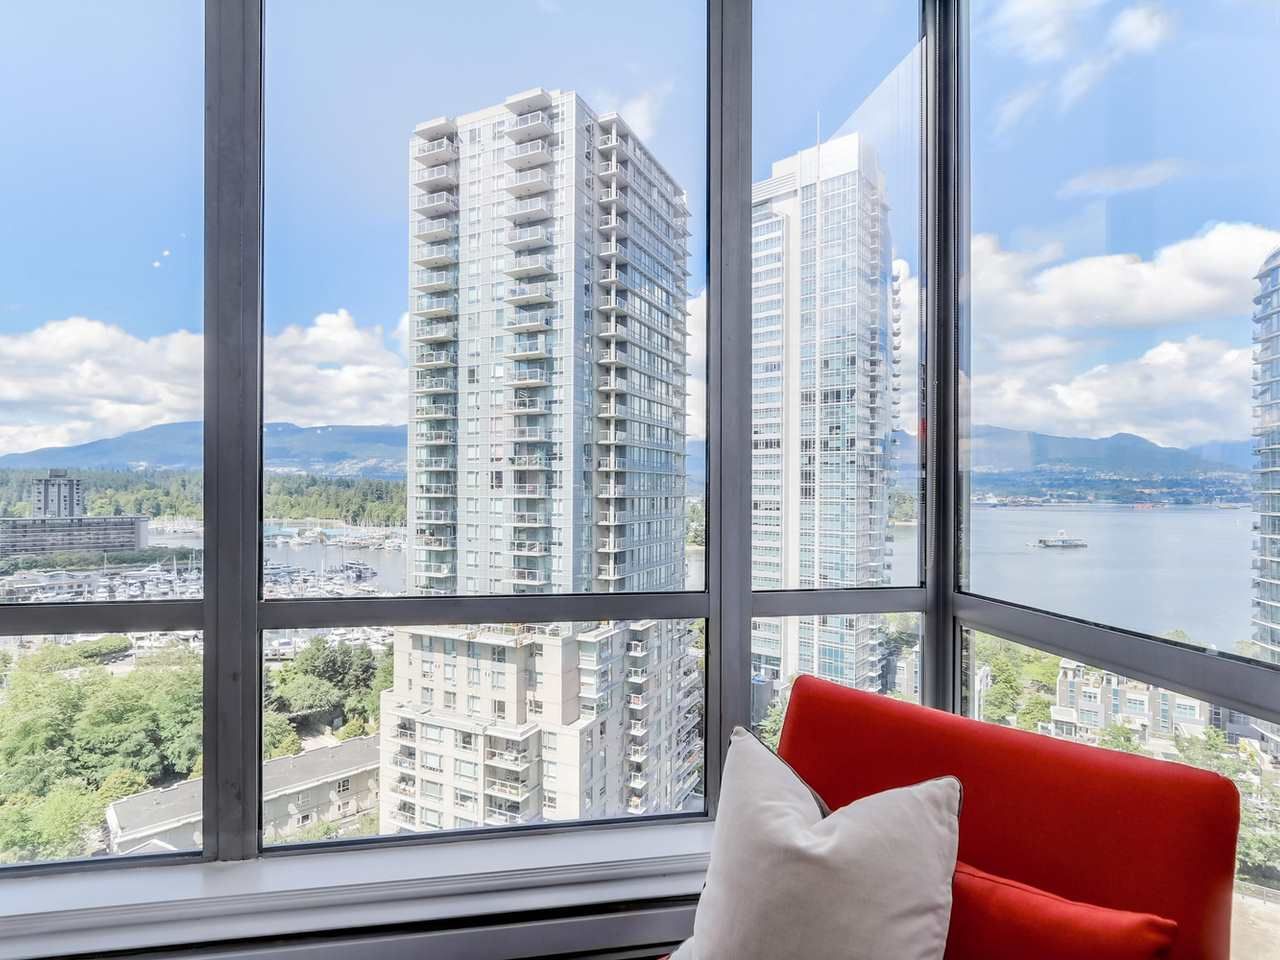 Main Photo: 1401 1228 W HASTINGS STREET in : Coal Harbour Condo for sale : MLS®# R2103469